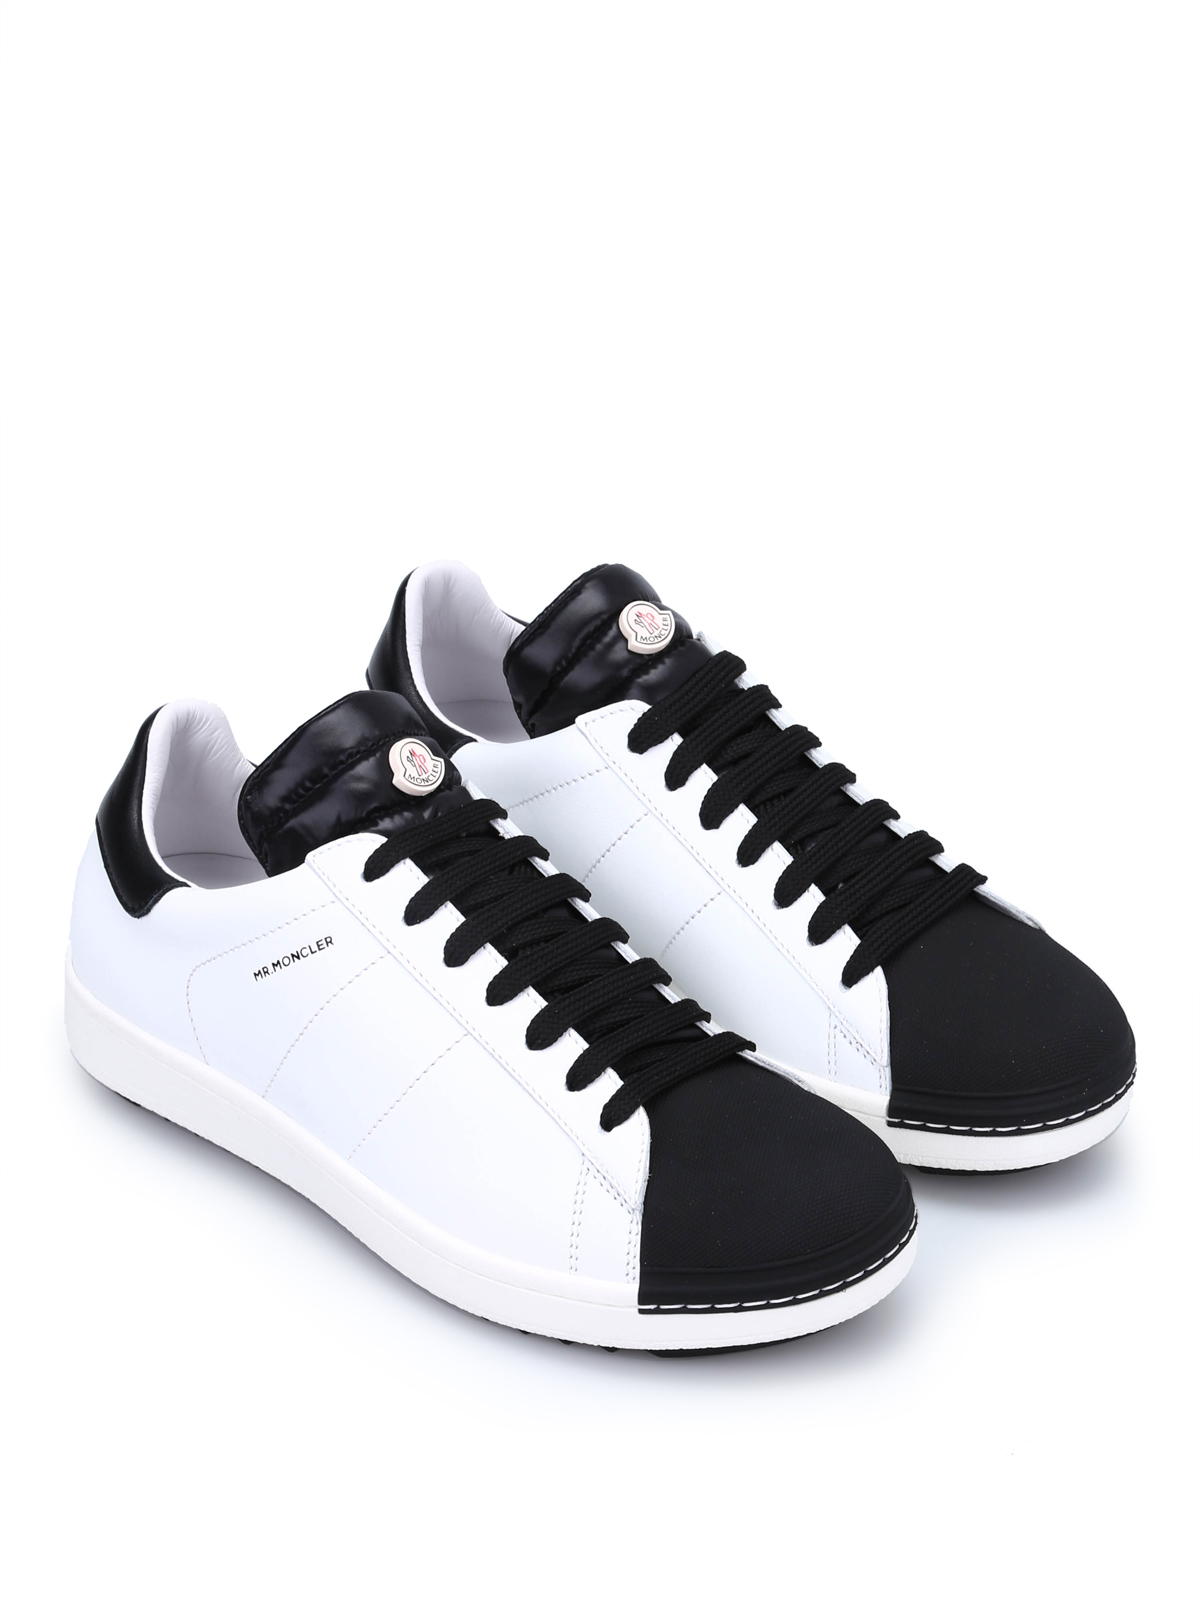 Moncler - Joachim sneakers - trainers 